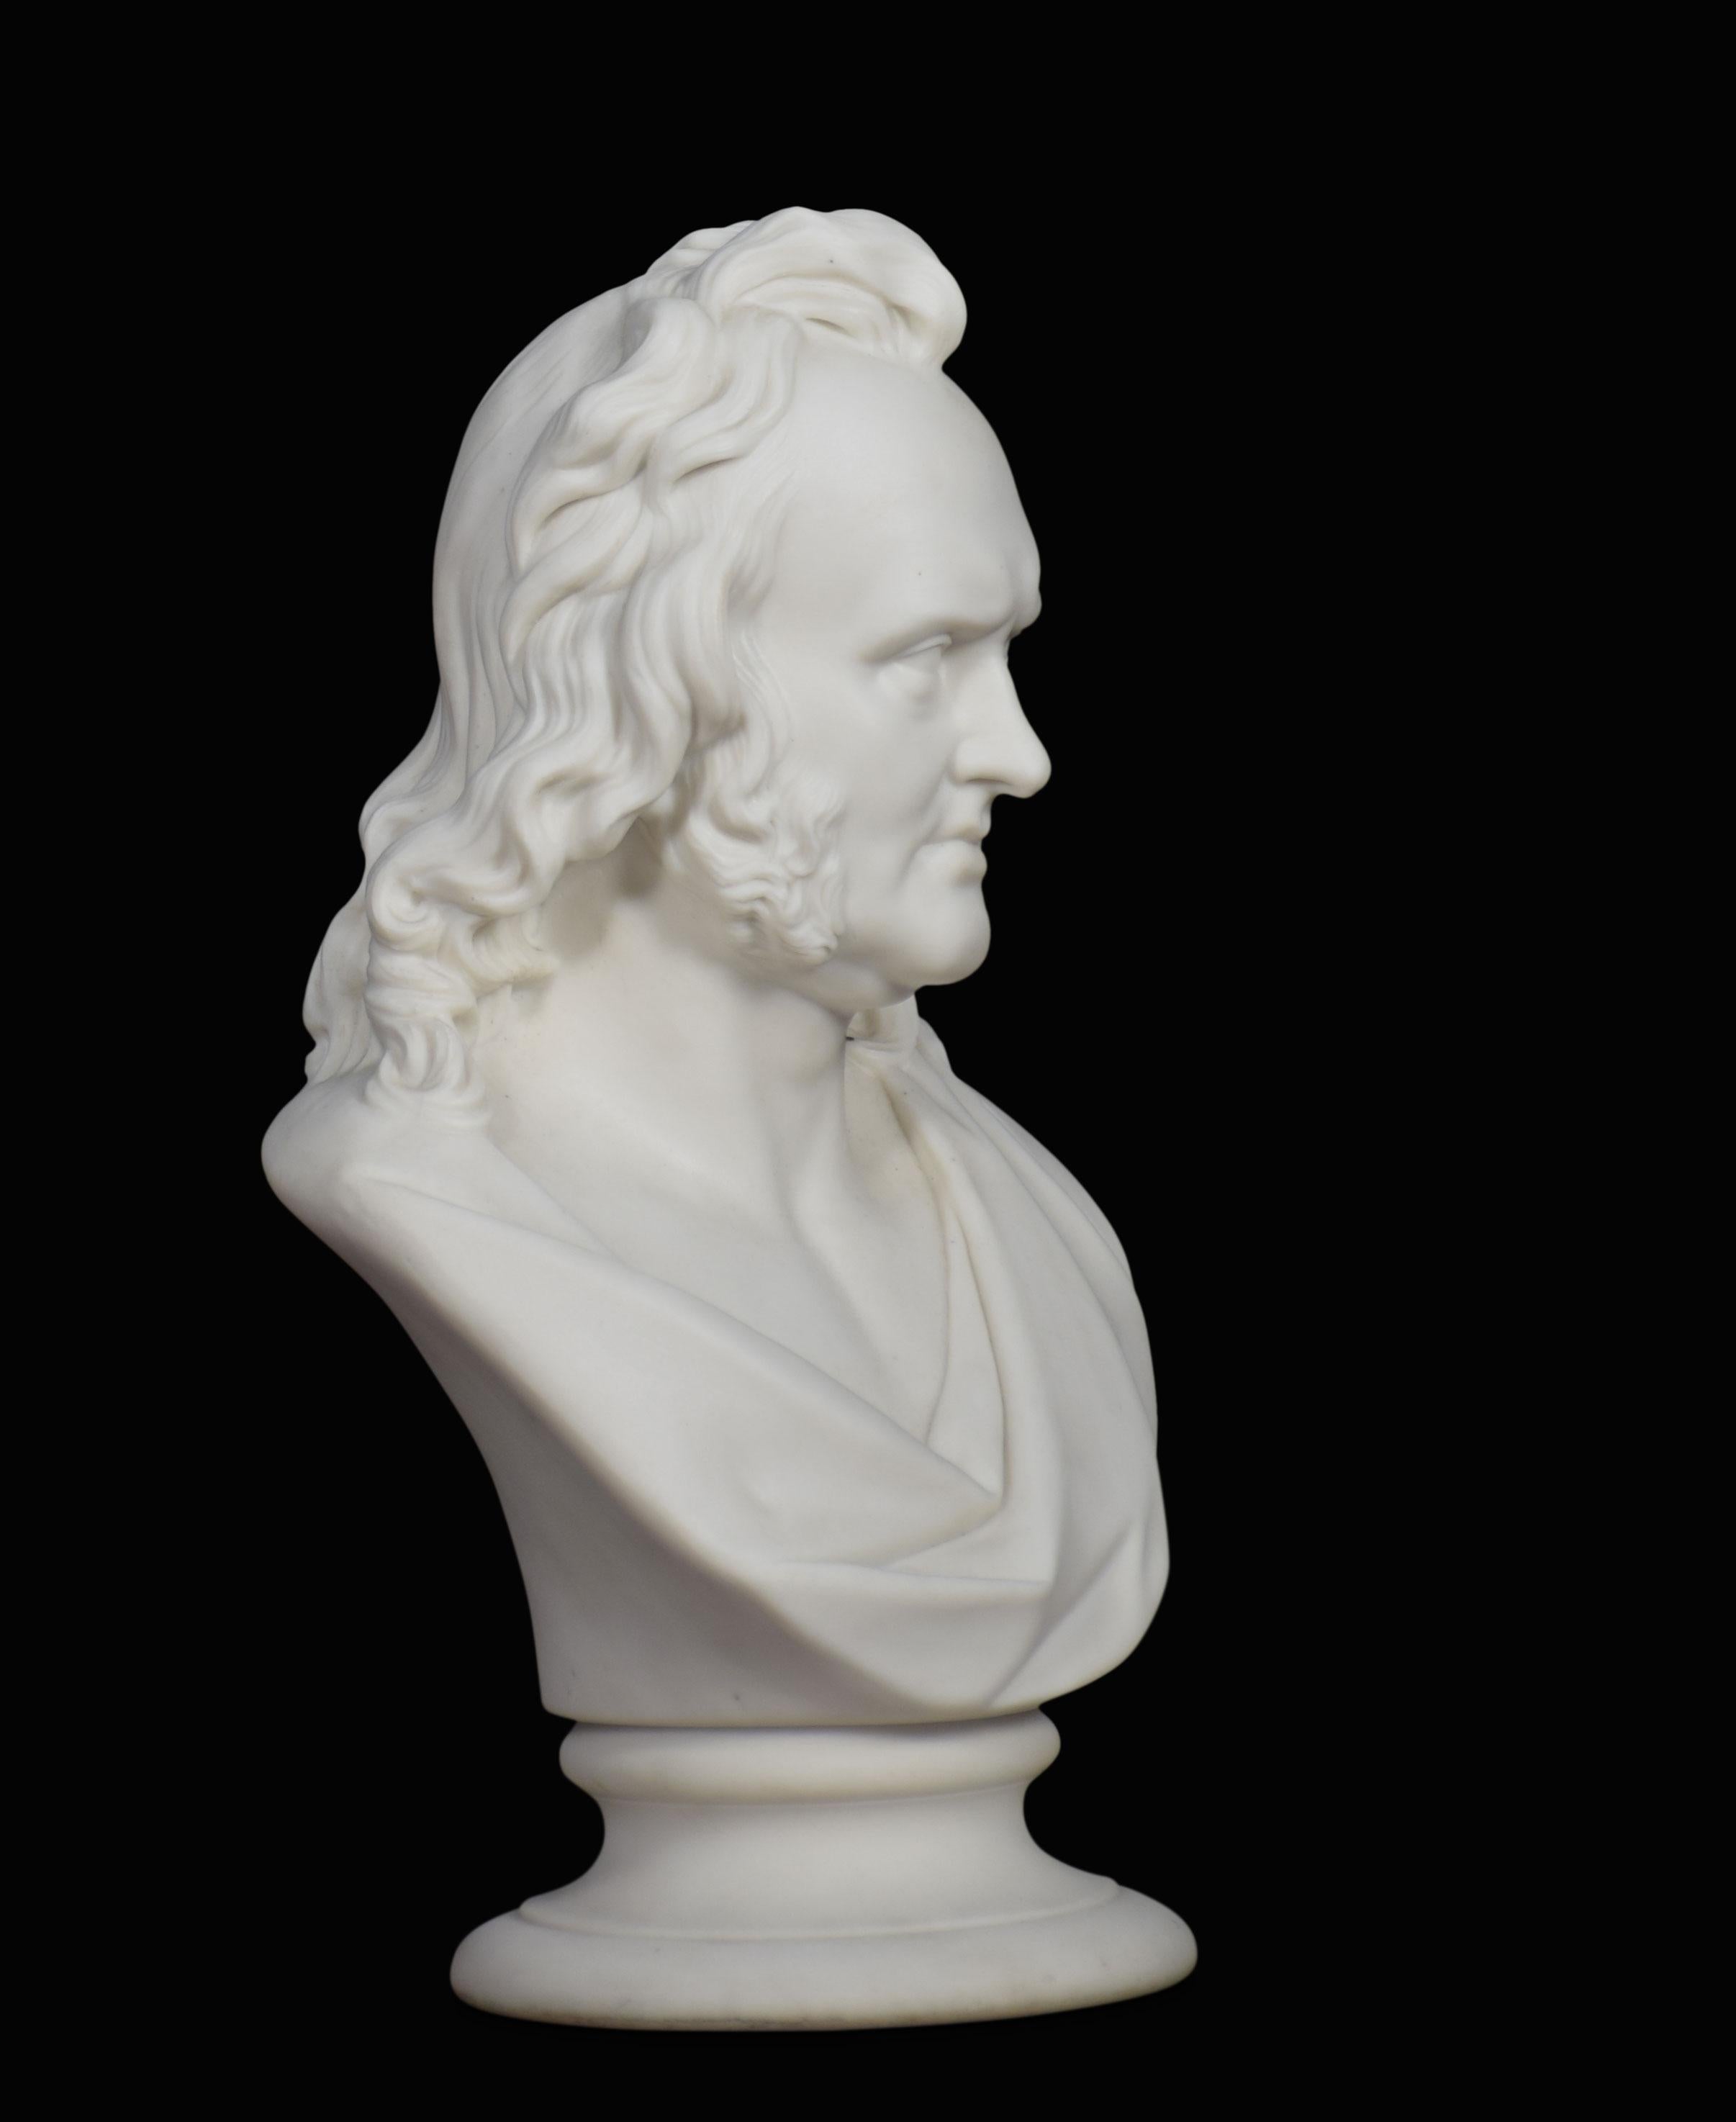 A 19th-century Parian bust of Professor John Wilson raised up on a circular base.
Dimensions
Height 11.5 inches
Length 7 inches
width 5.5 inches.